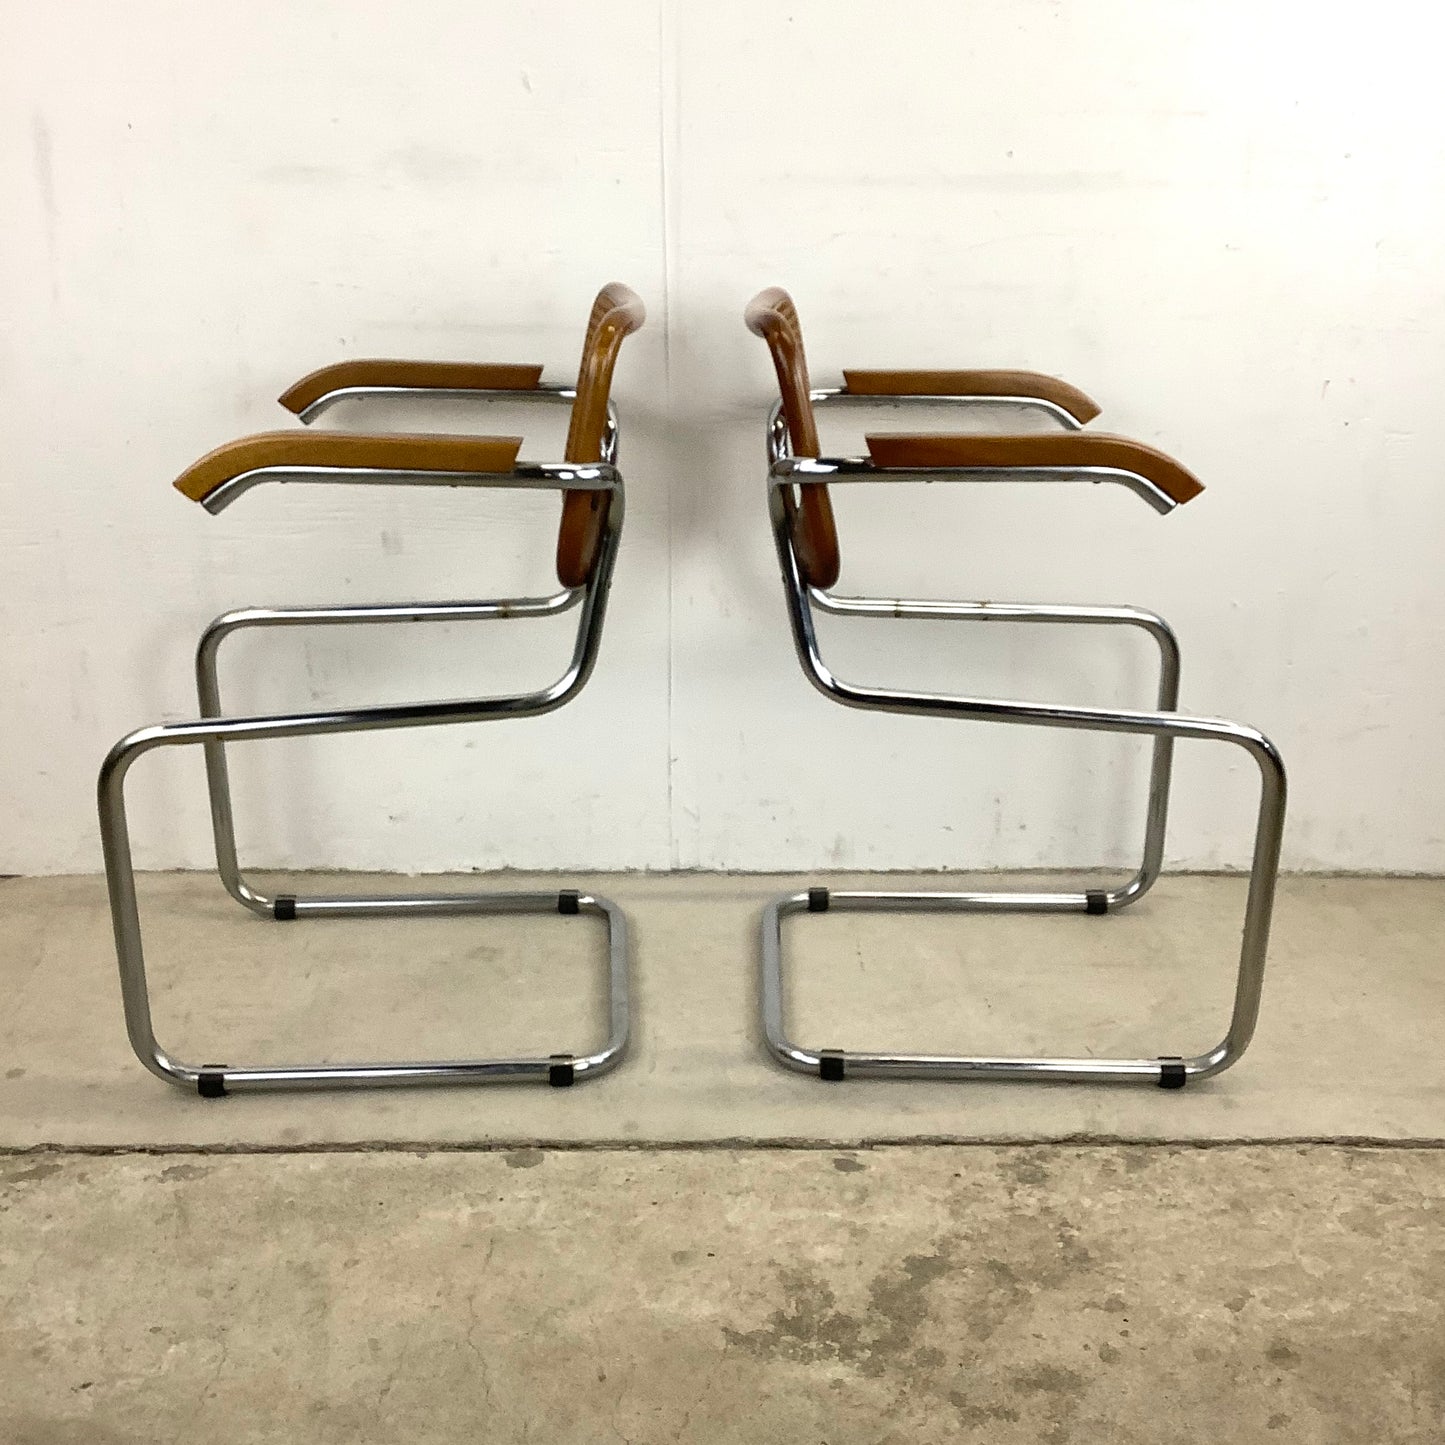 Vintage Cesca Style Cane Back Cantilever Dining Chair Frames- Pair